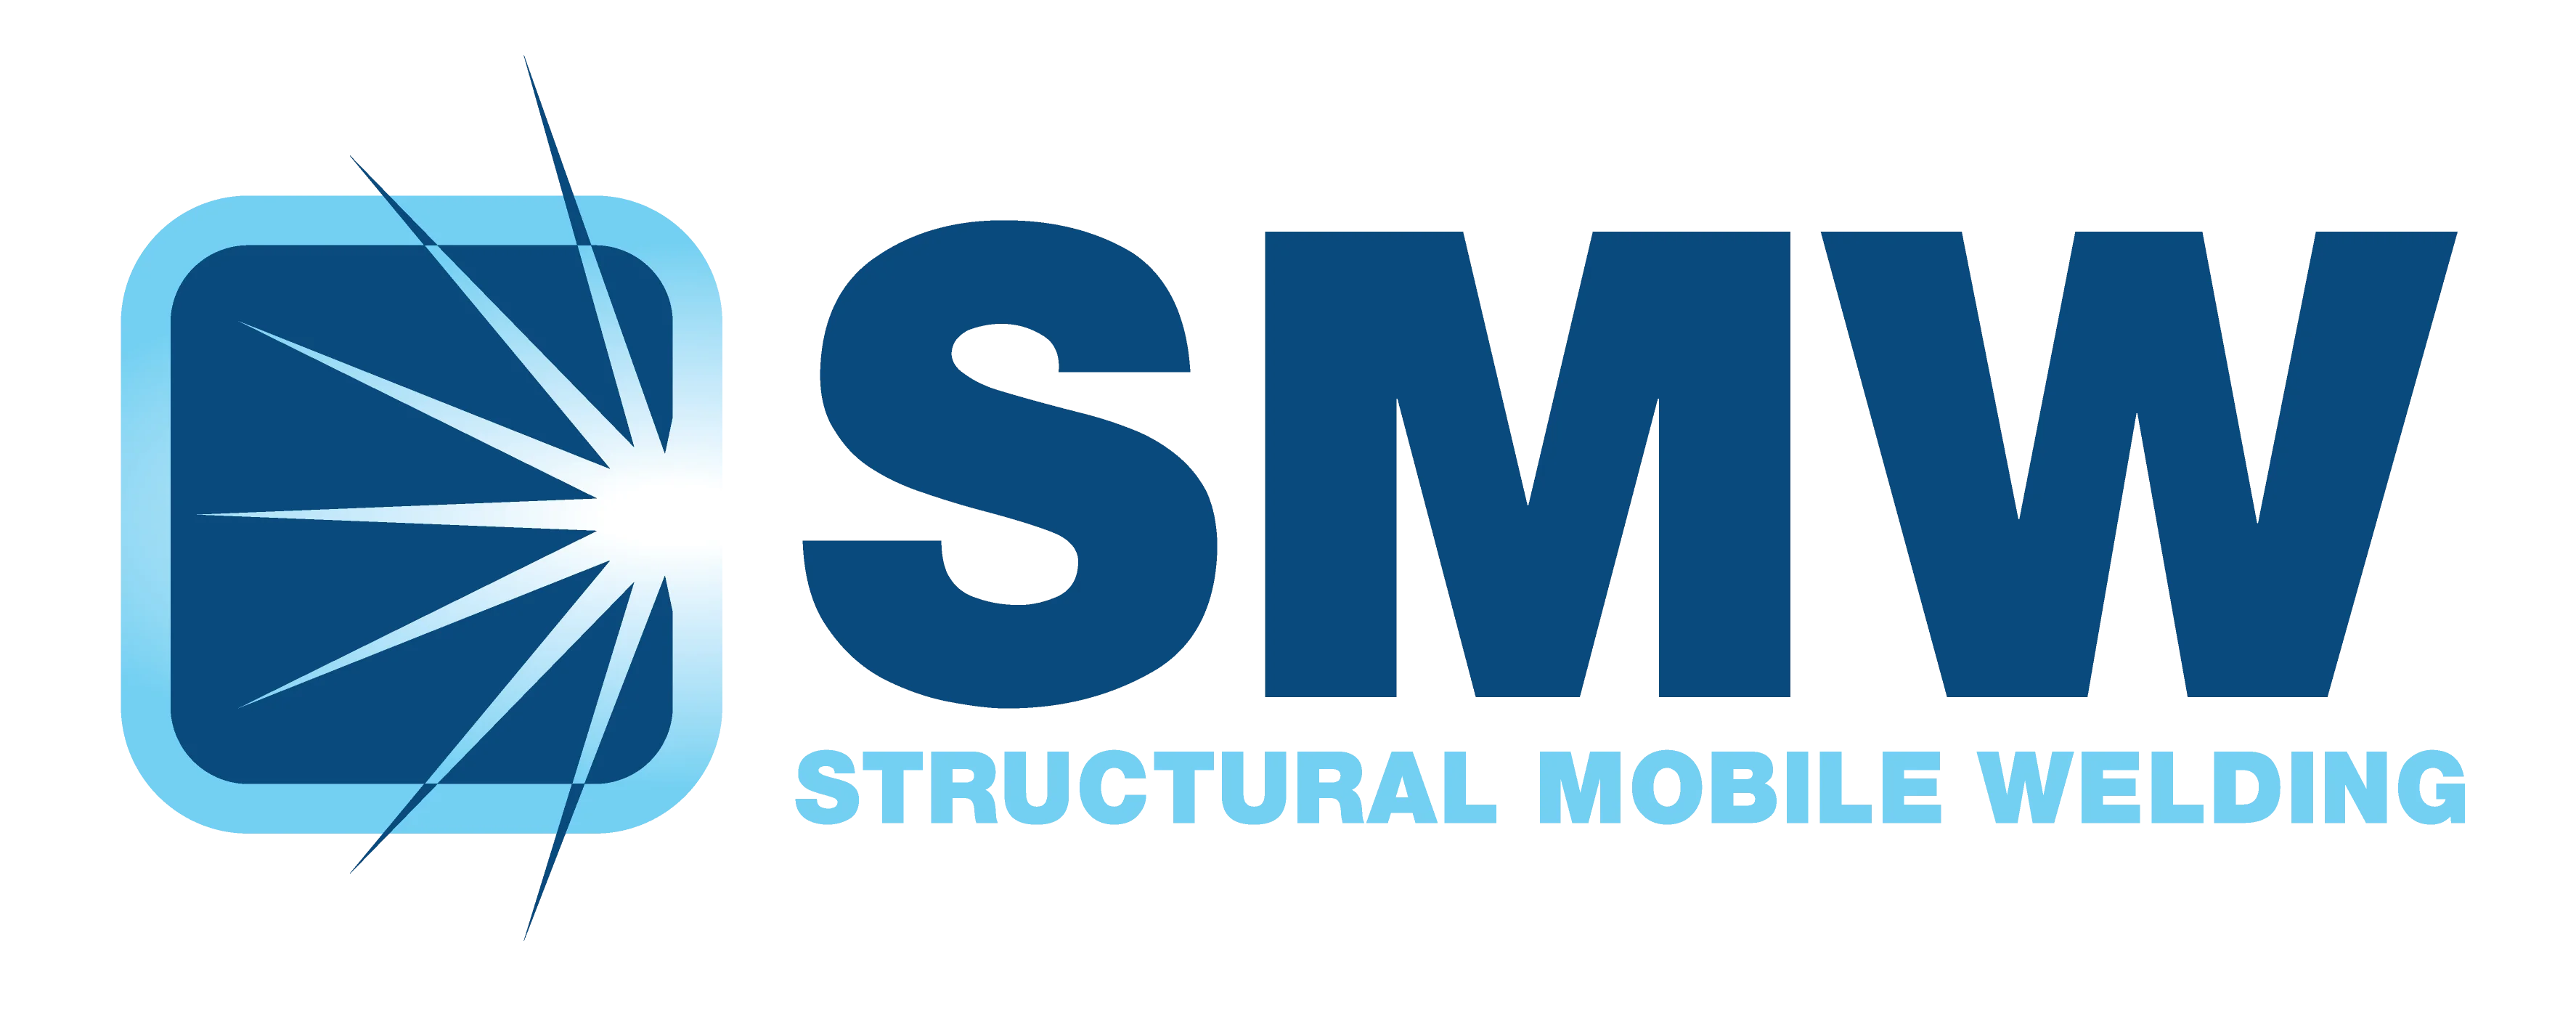 Structural Mobile Welding Logo